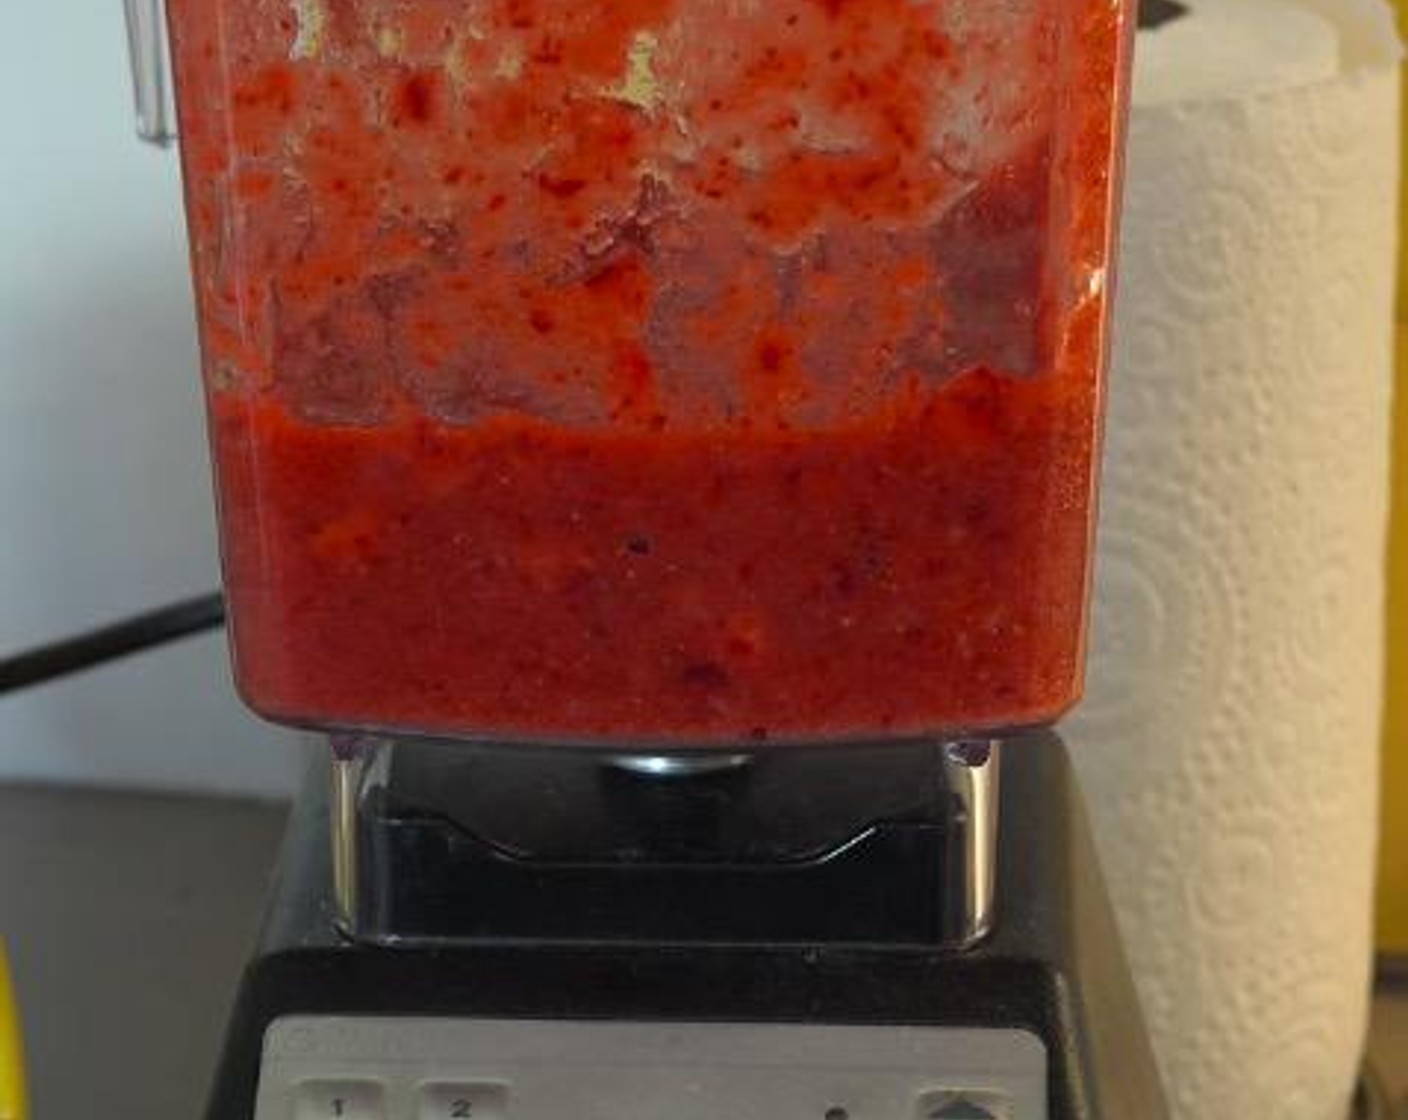 step 1 In a blender, blitz Fresh Strawberries (3 1/3 cups) until pureed. Set aside.